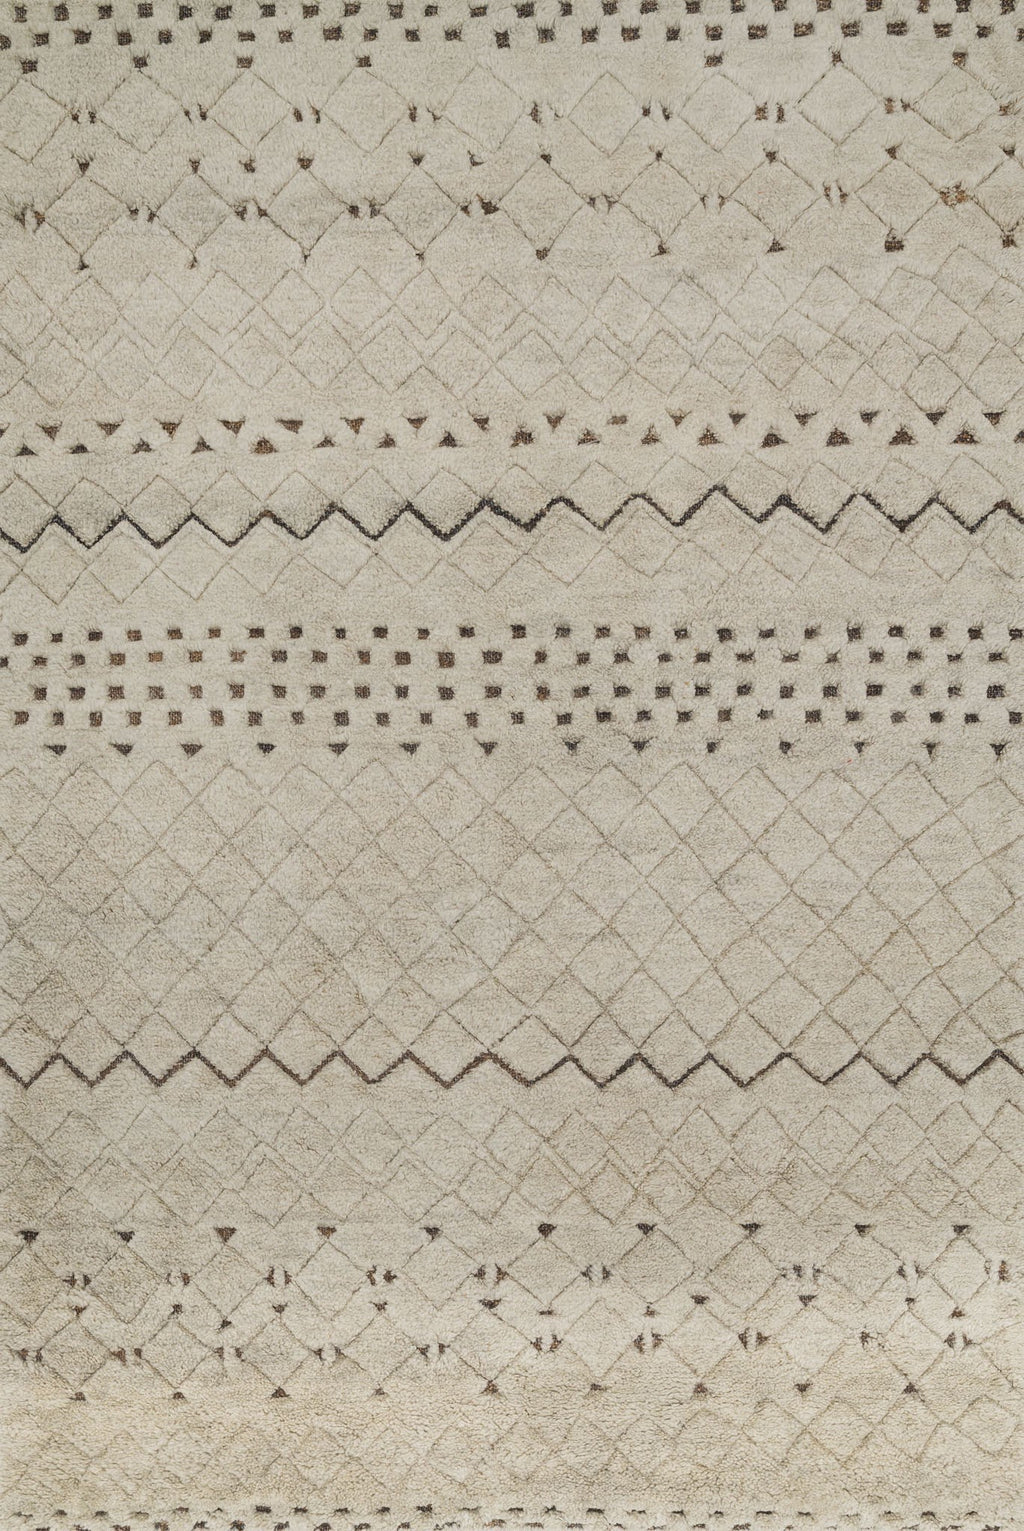 TANZANIA/HEMINGWAY Collection Rug  in  SAND Beige Small Hand-Knotted Jute/Wool